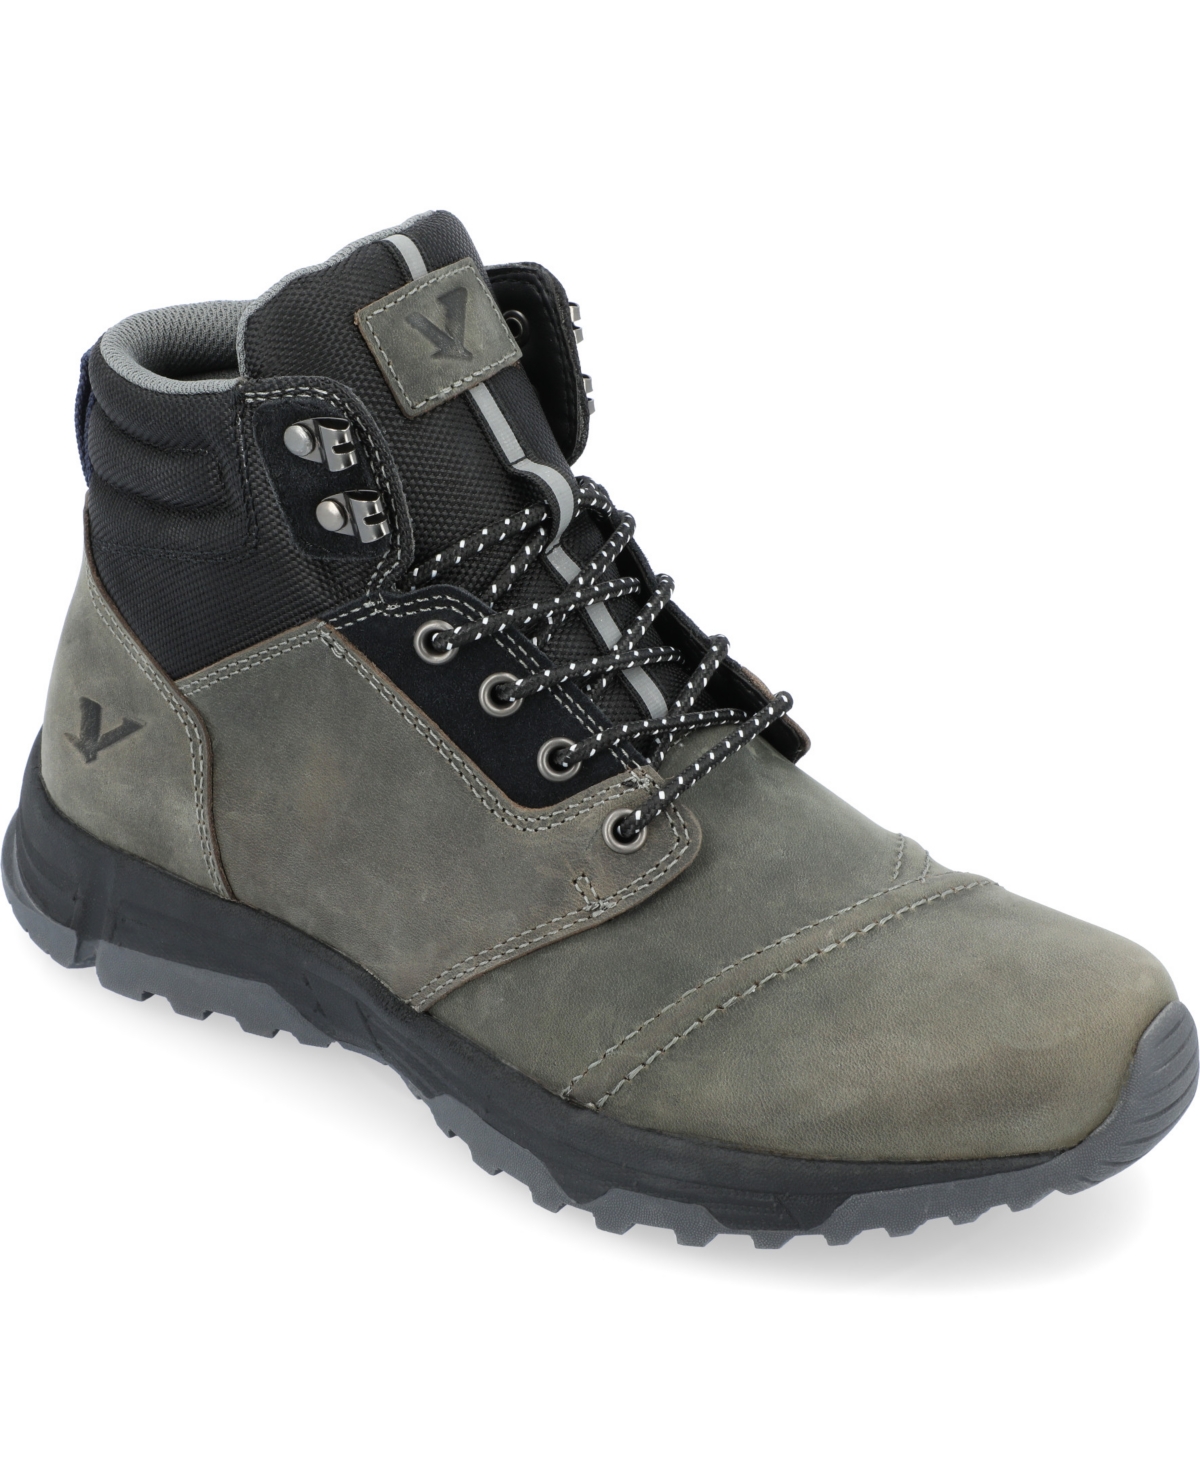 Men's Everglades Tru Comfort Foam Lace-Up Water Resistant Ankle Boots - Gray